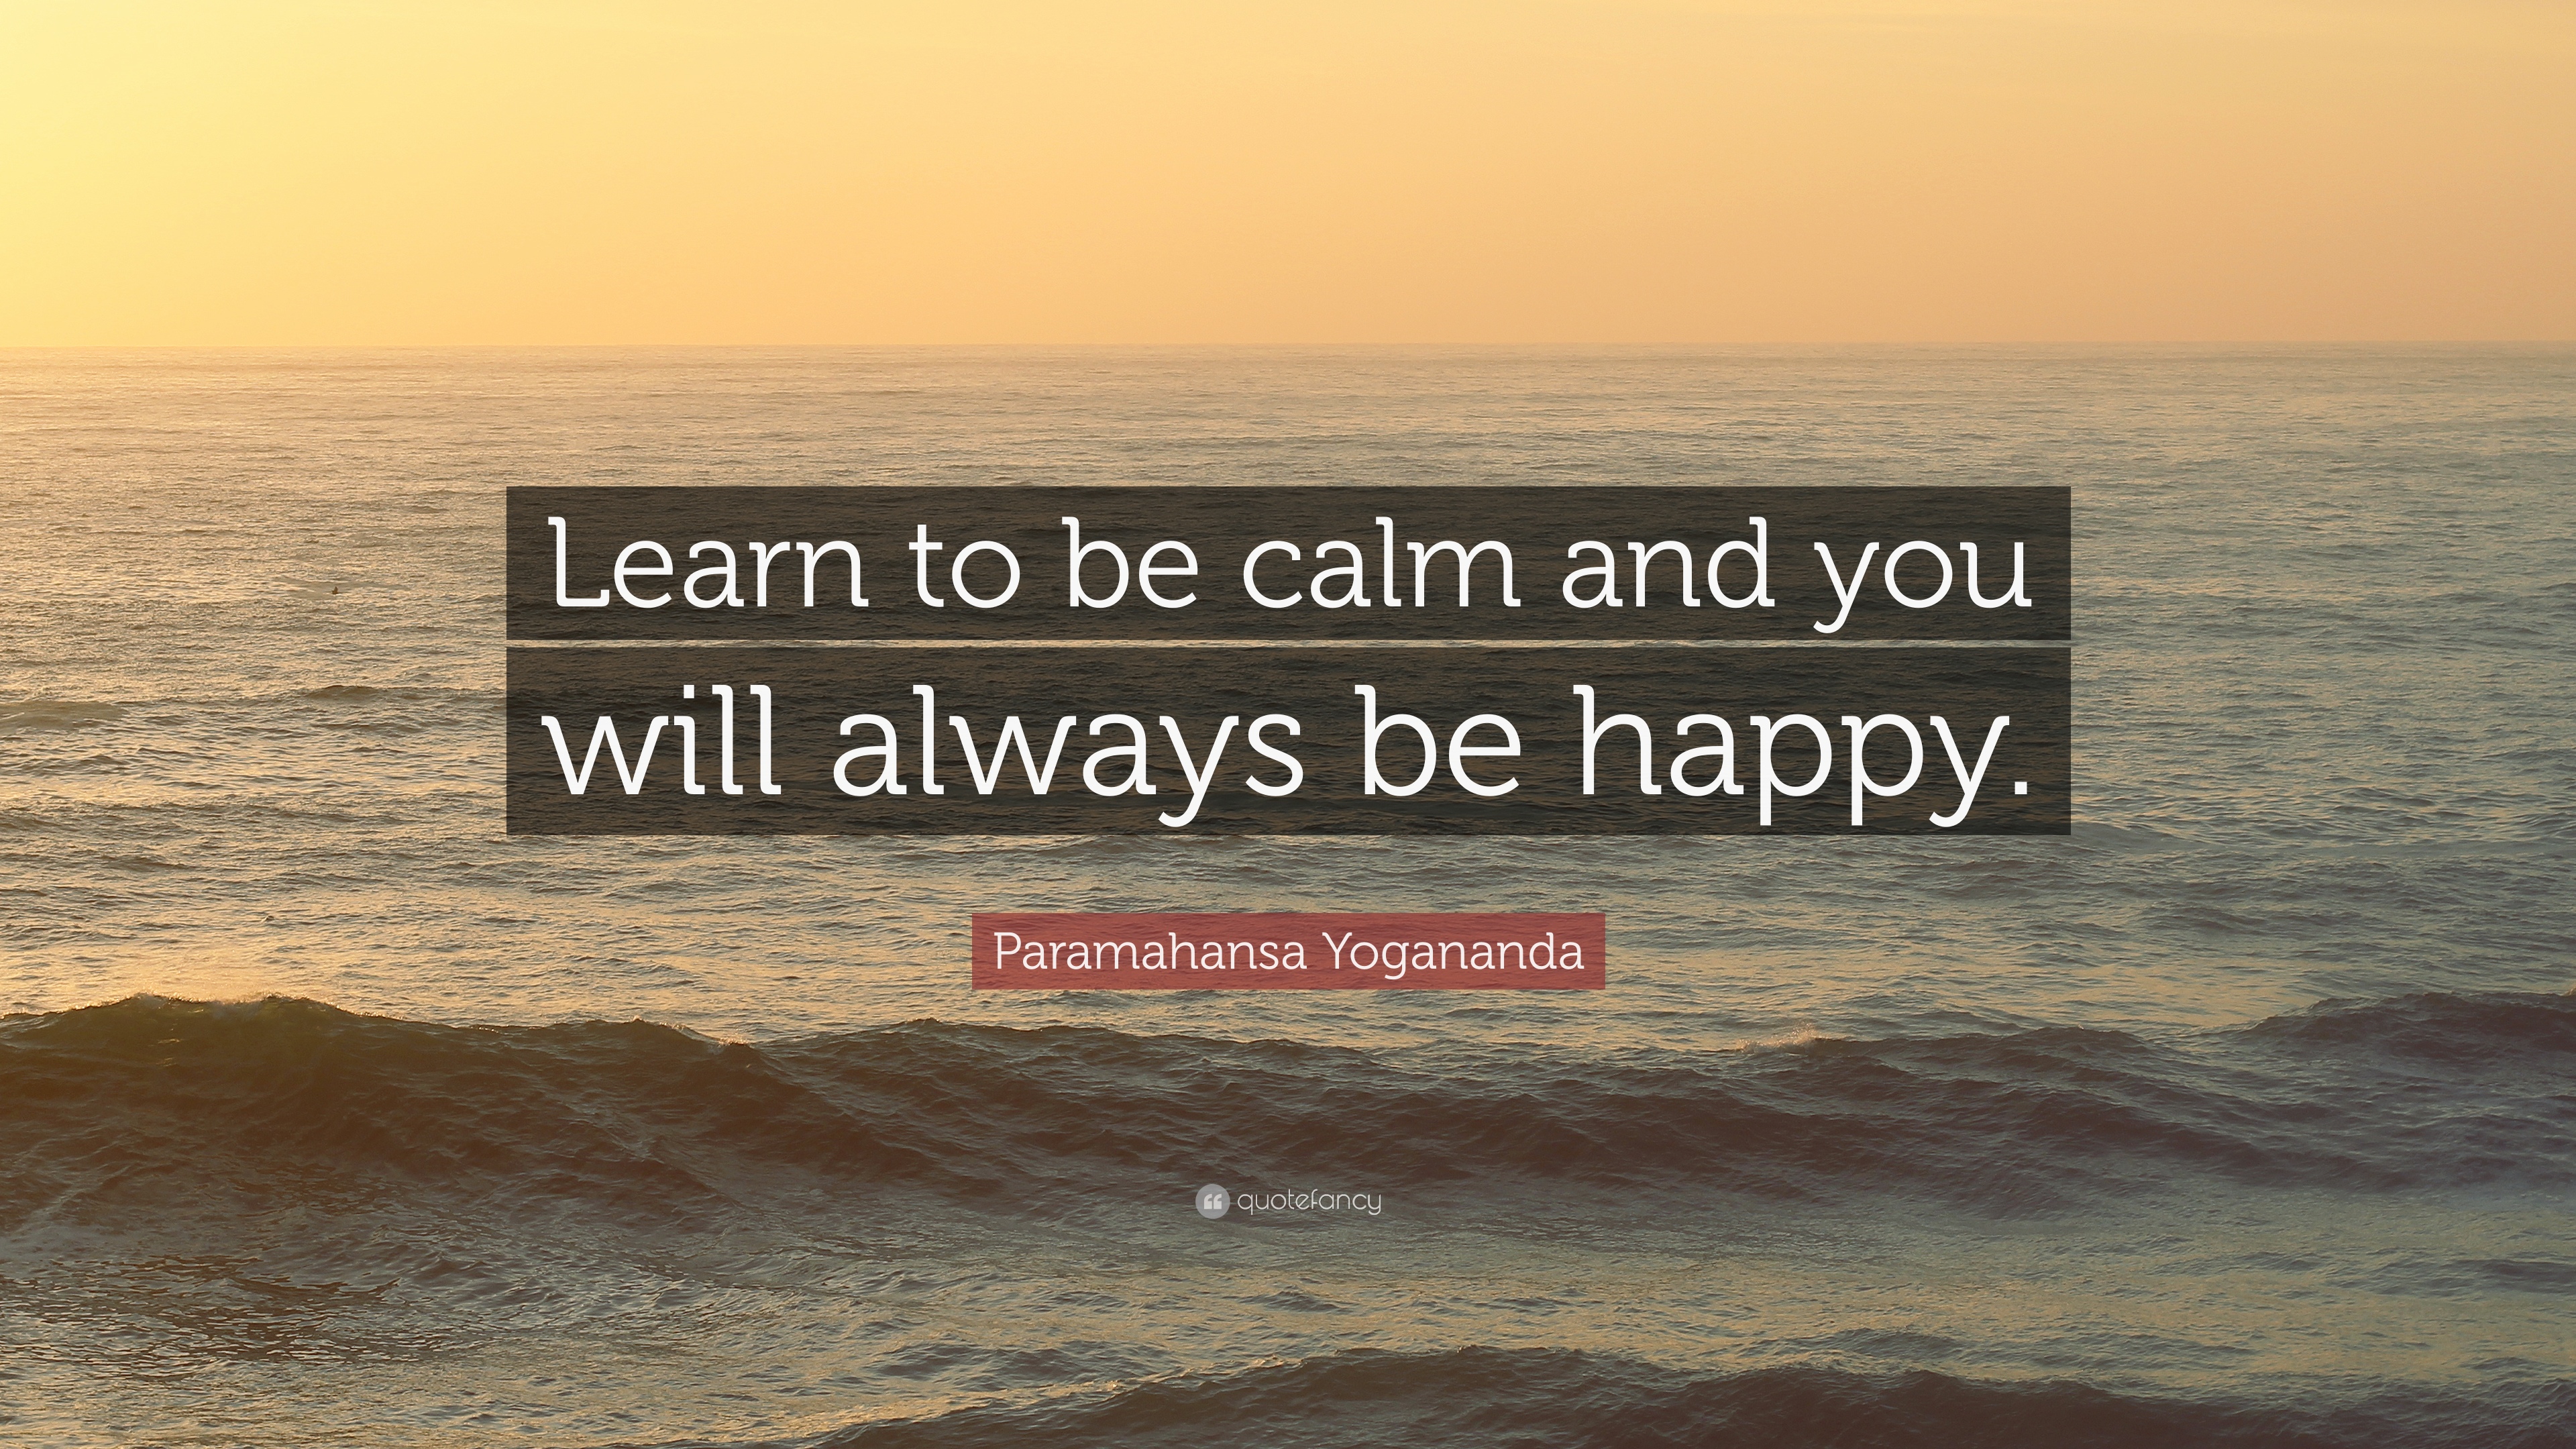 learn to be calm and you will always be happy. paramahansa yogananda